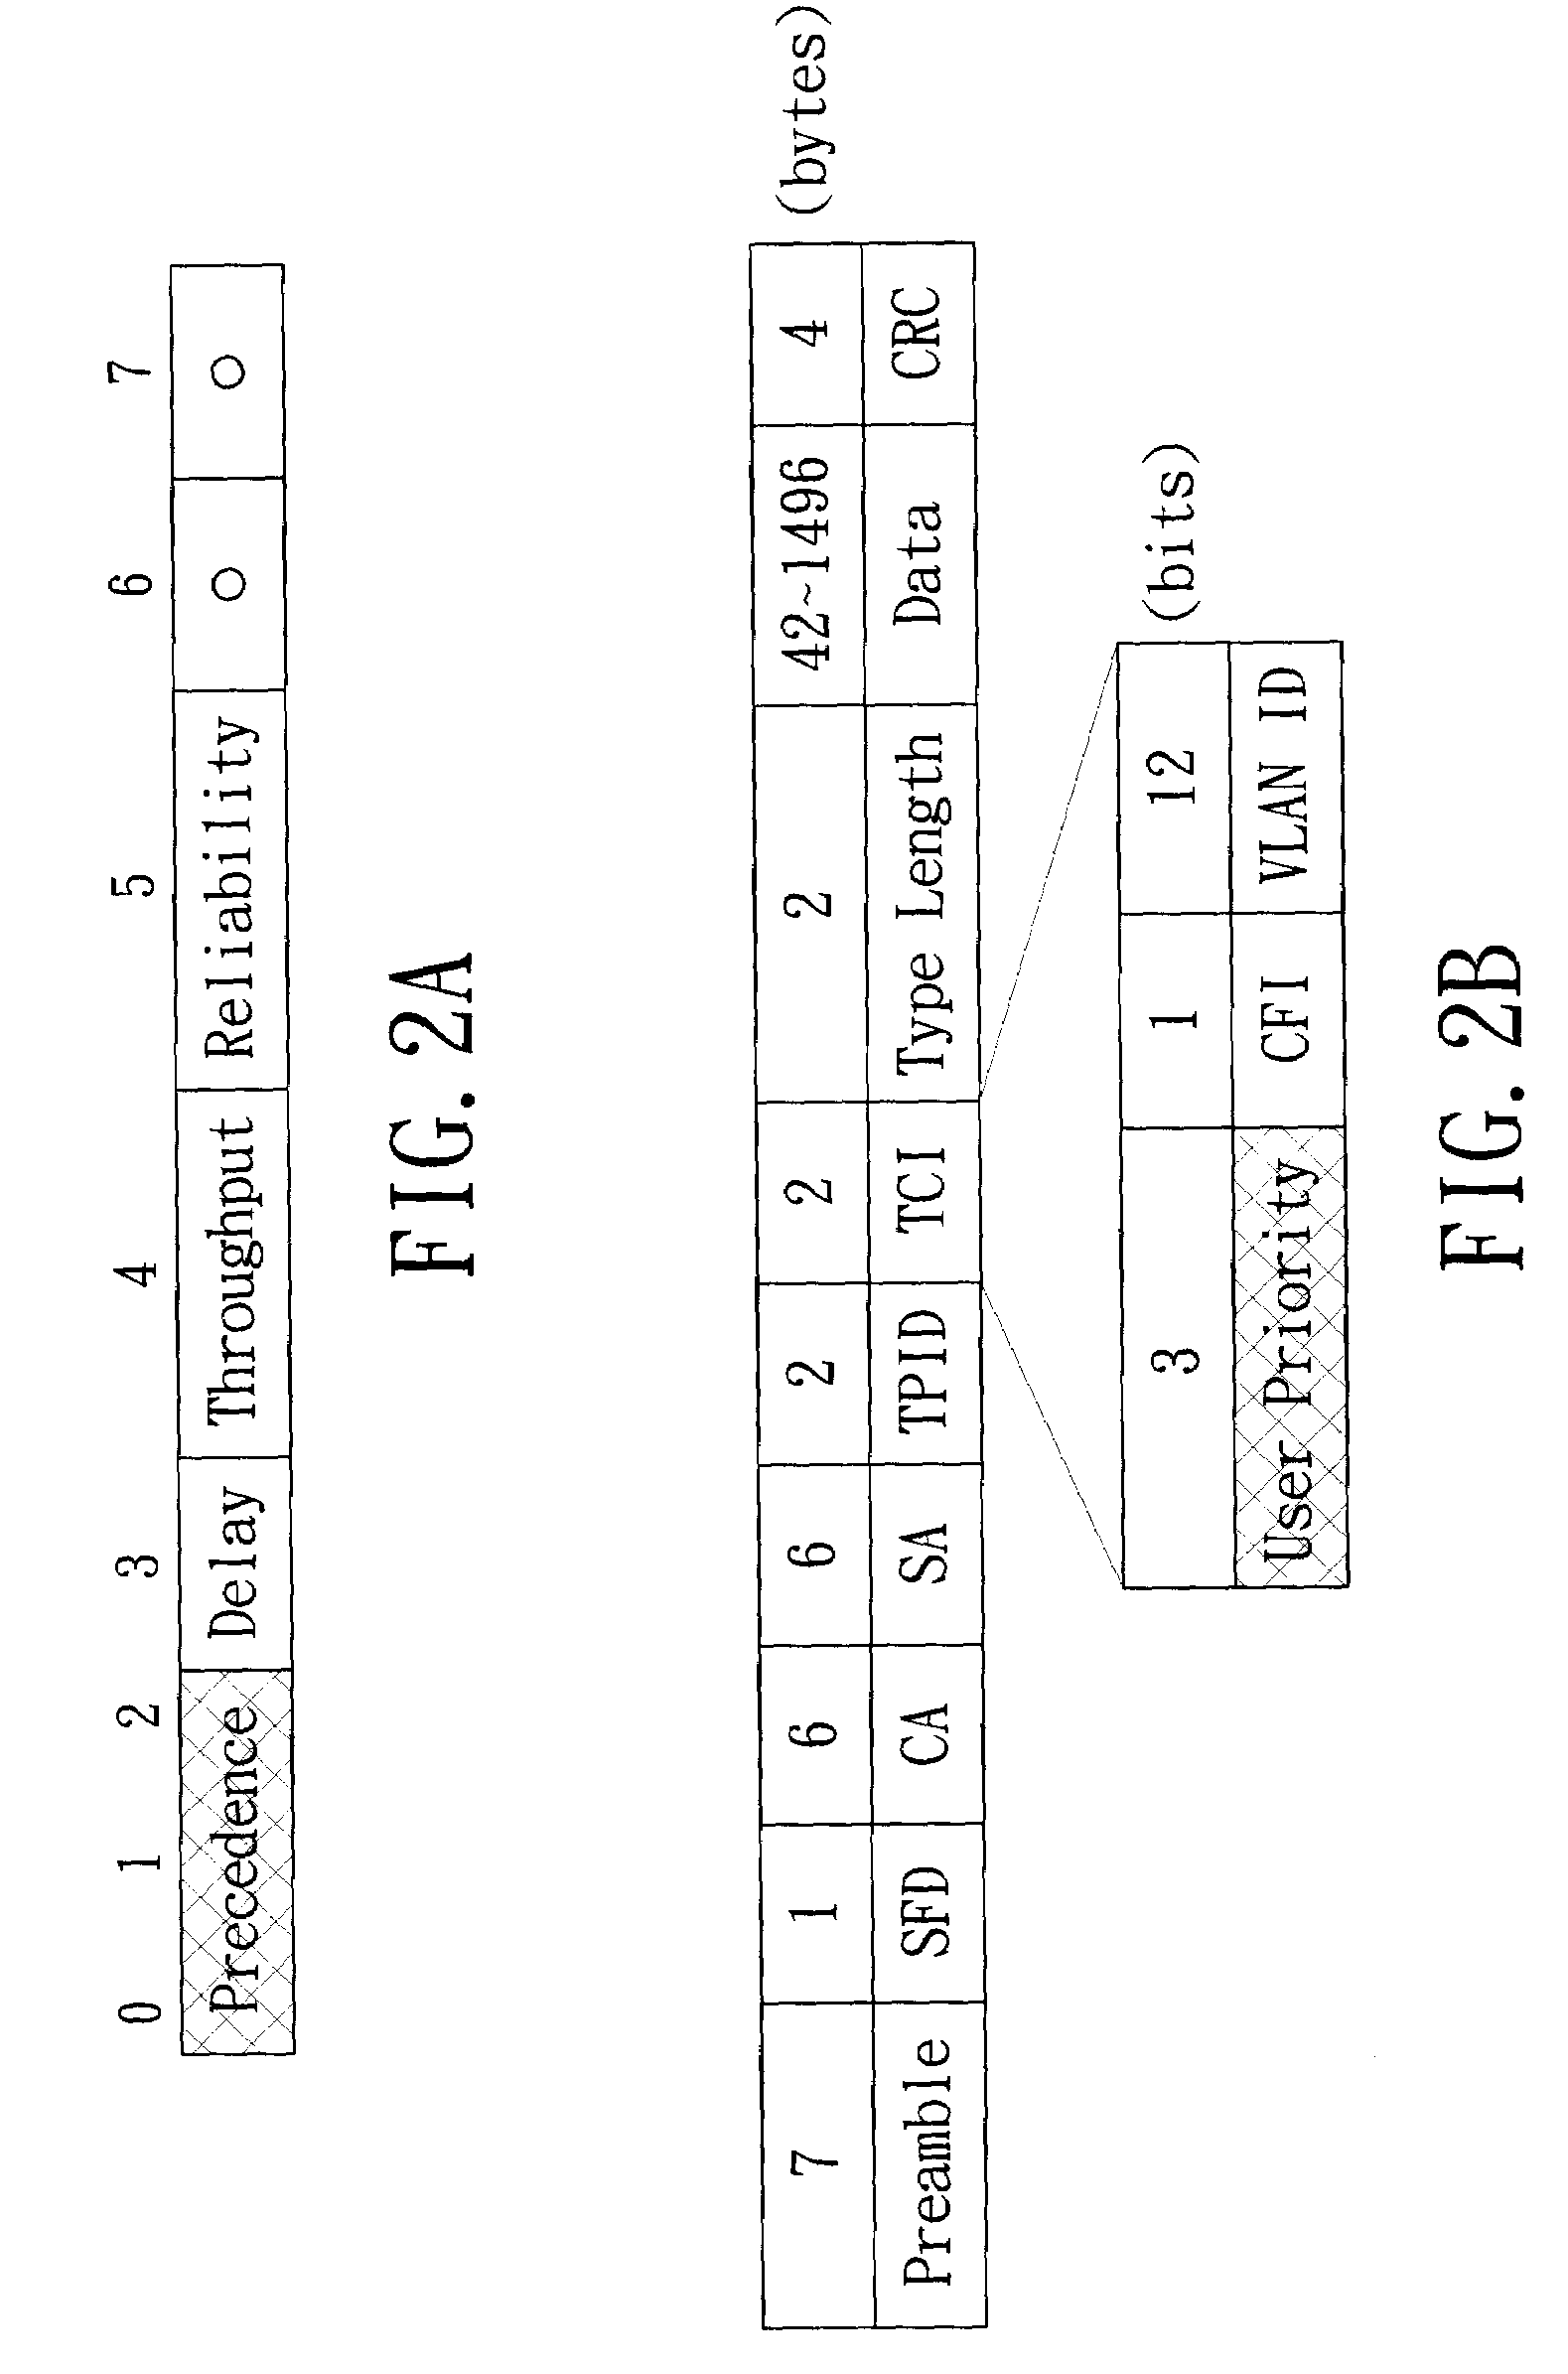 Method and system of auto-monitoring network ports